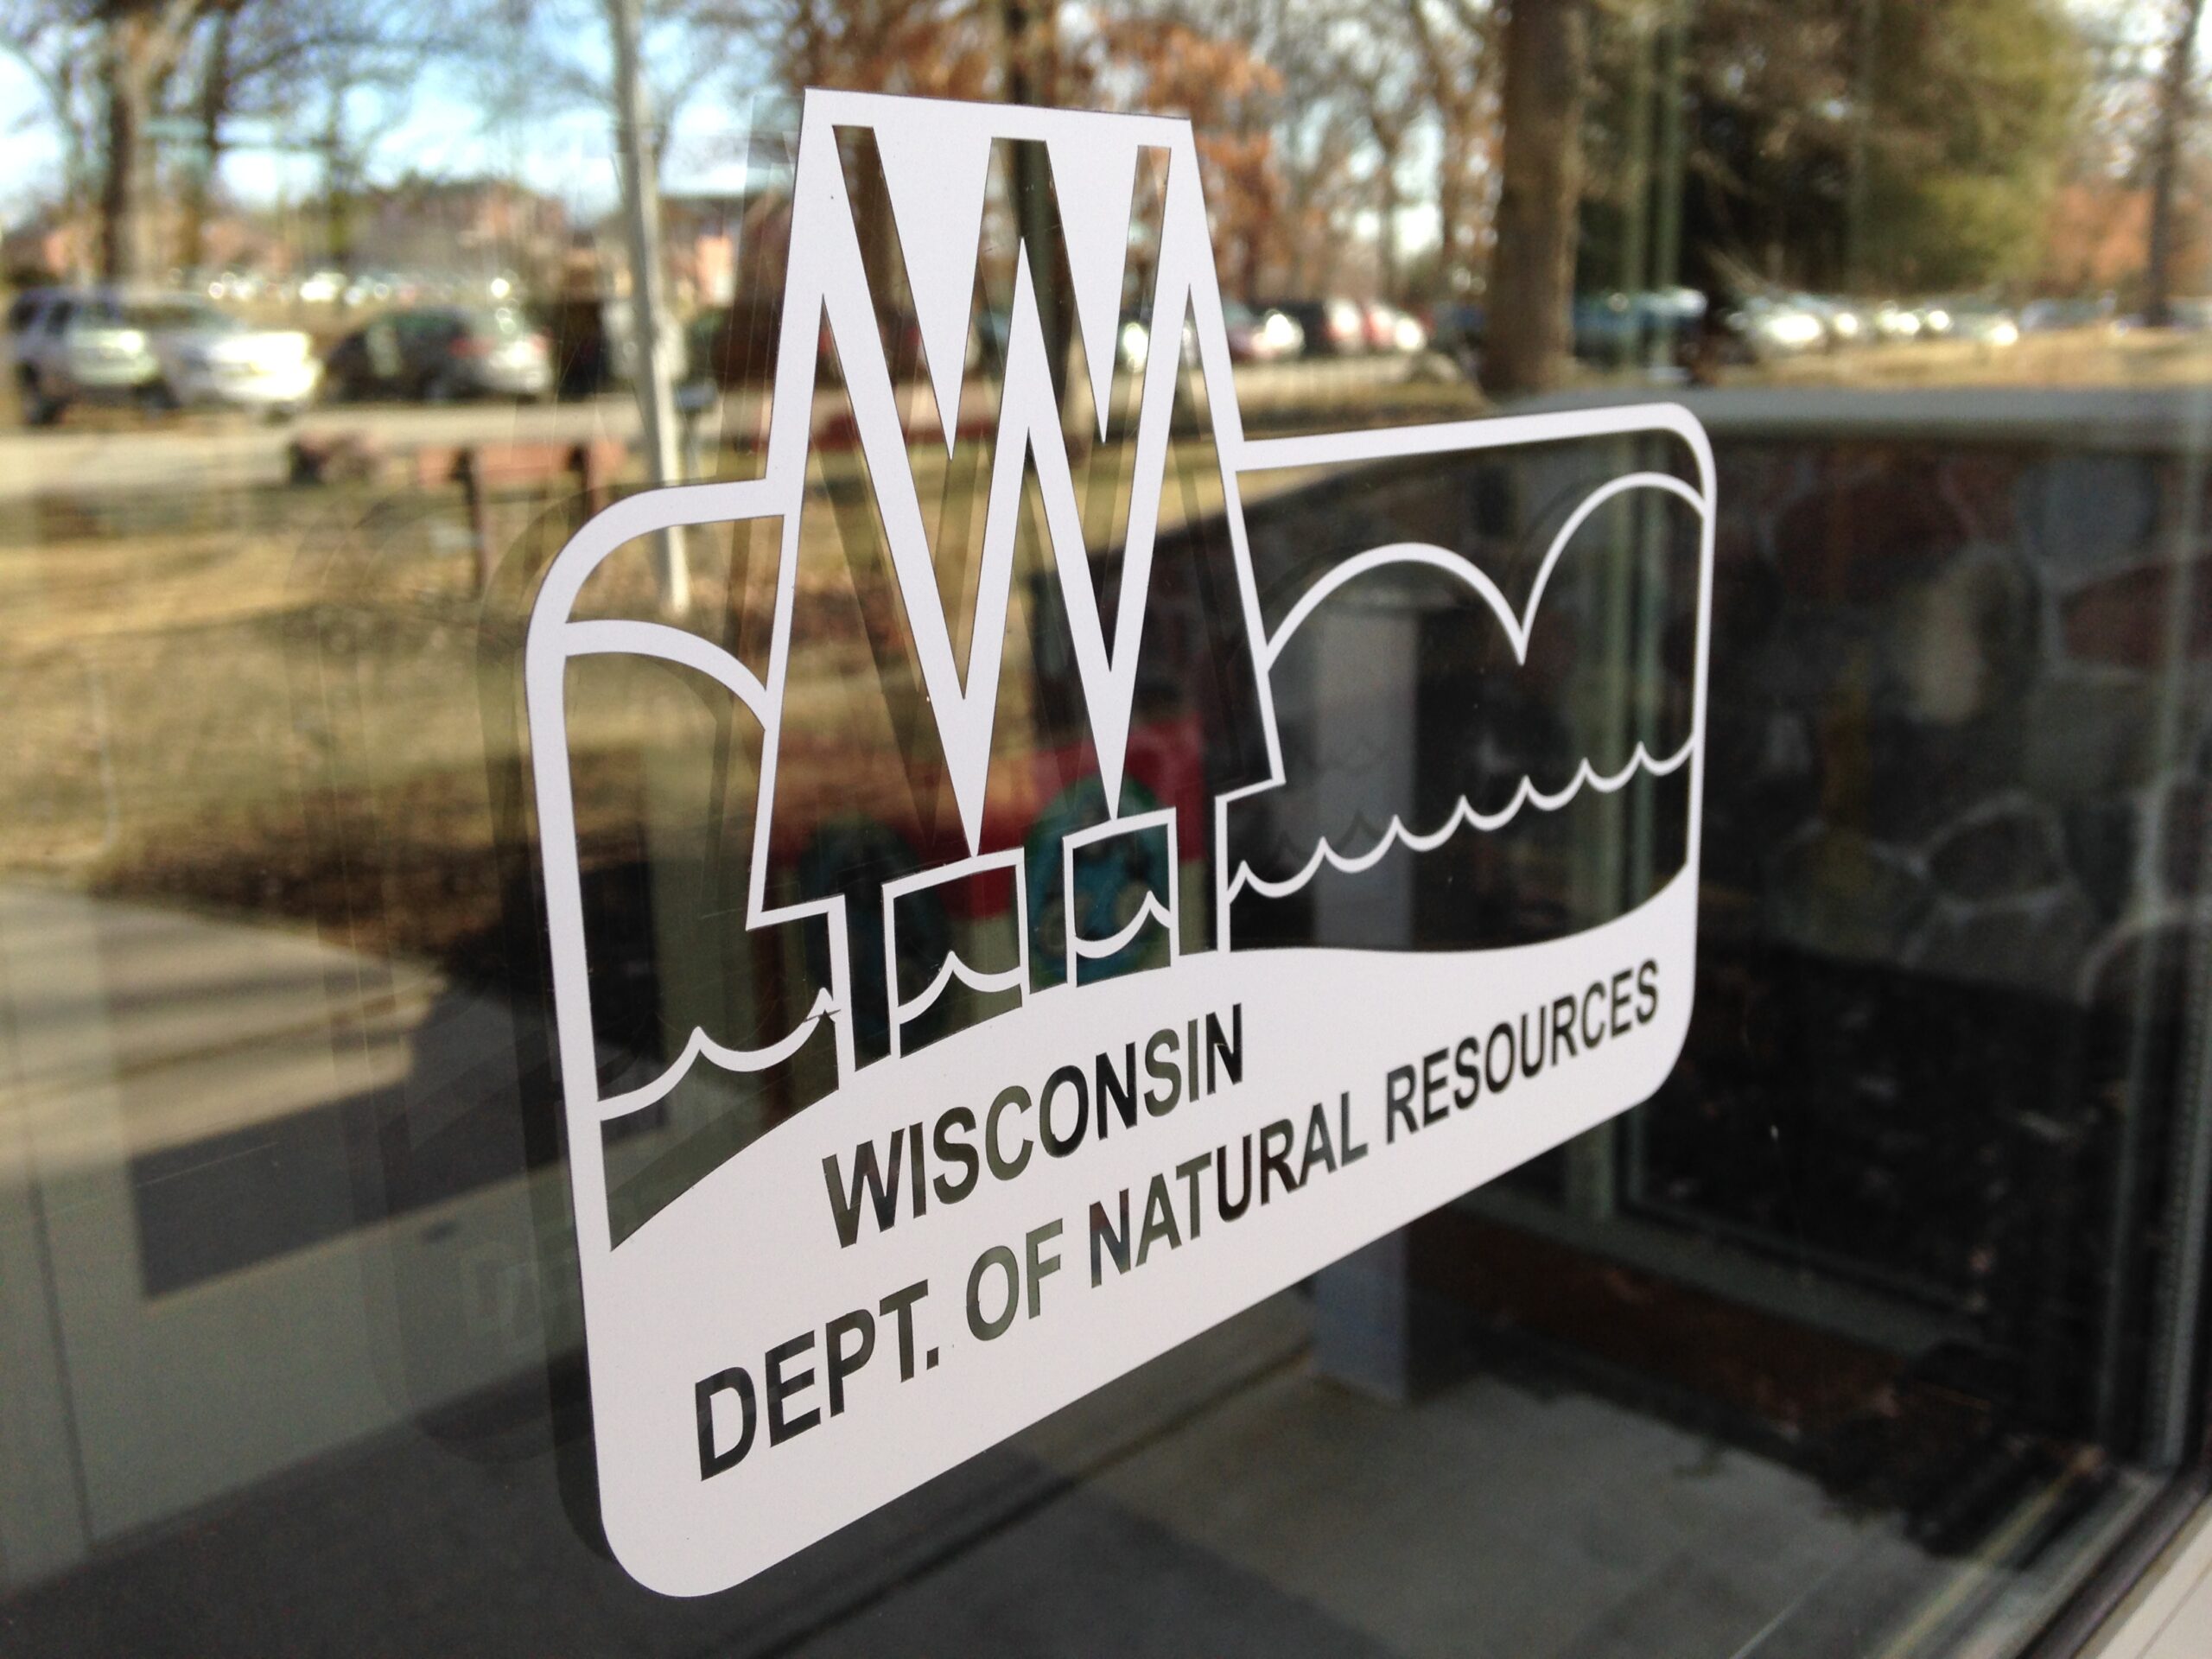 Lawsuit seeks to overturn DNR guidance on public’s right to access waterways